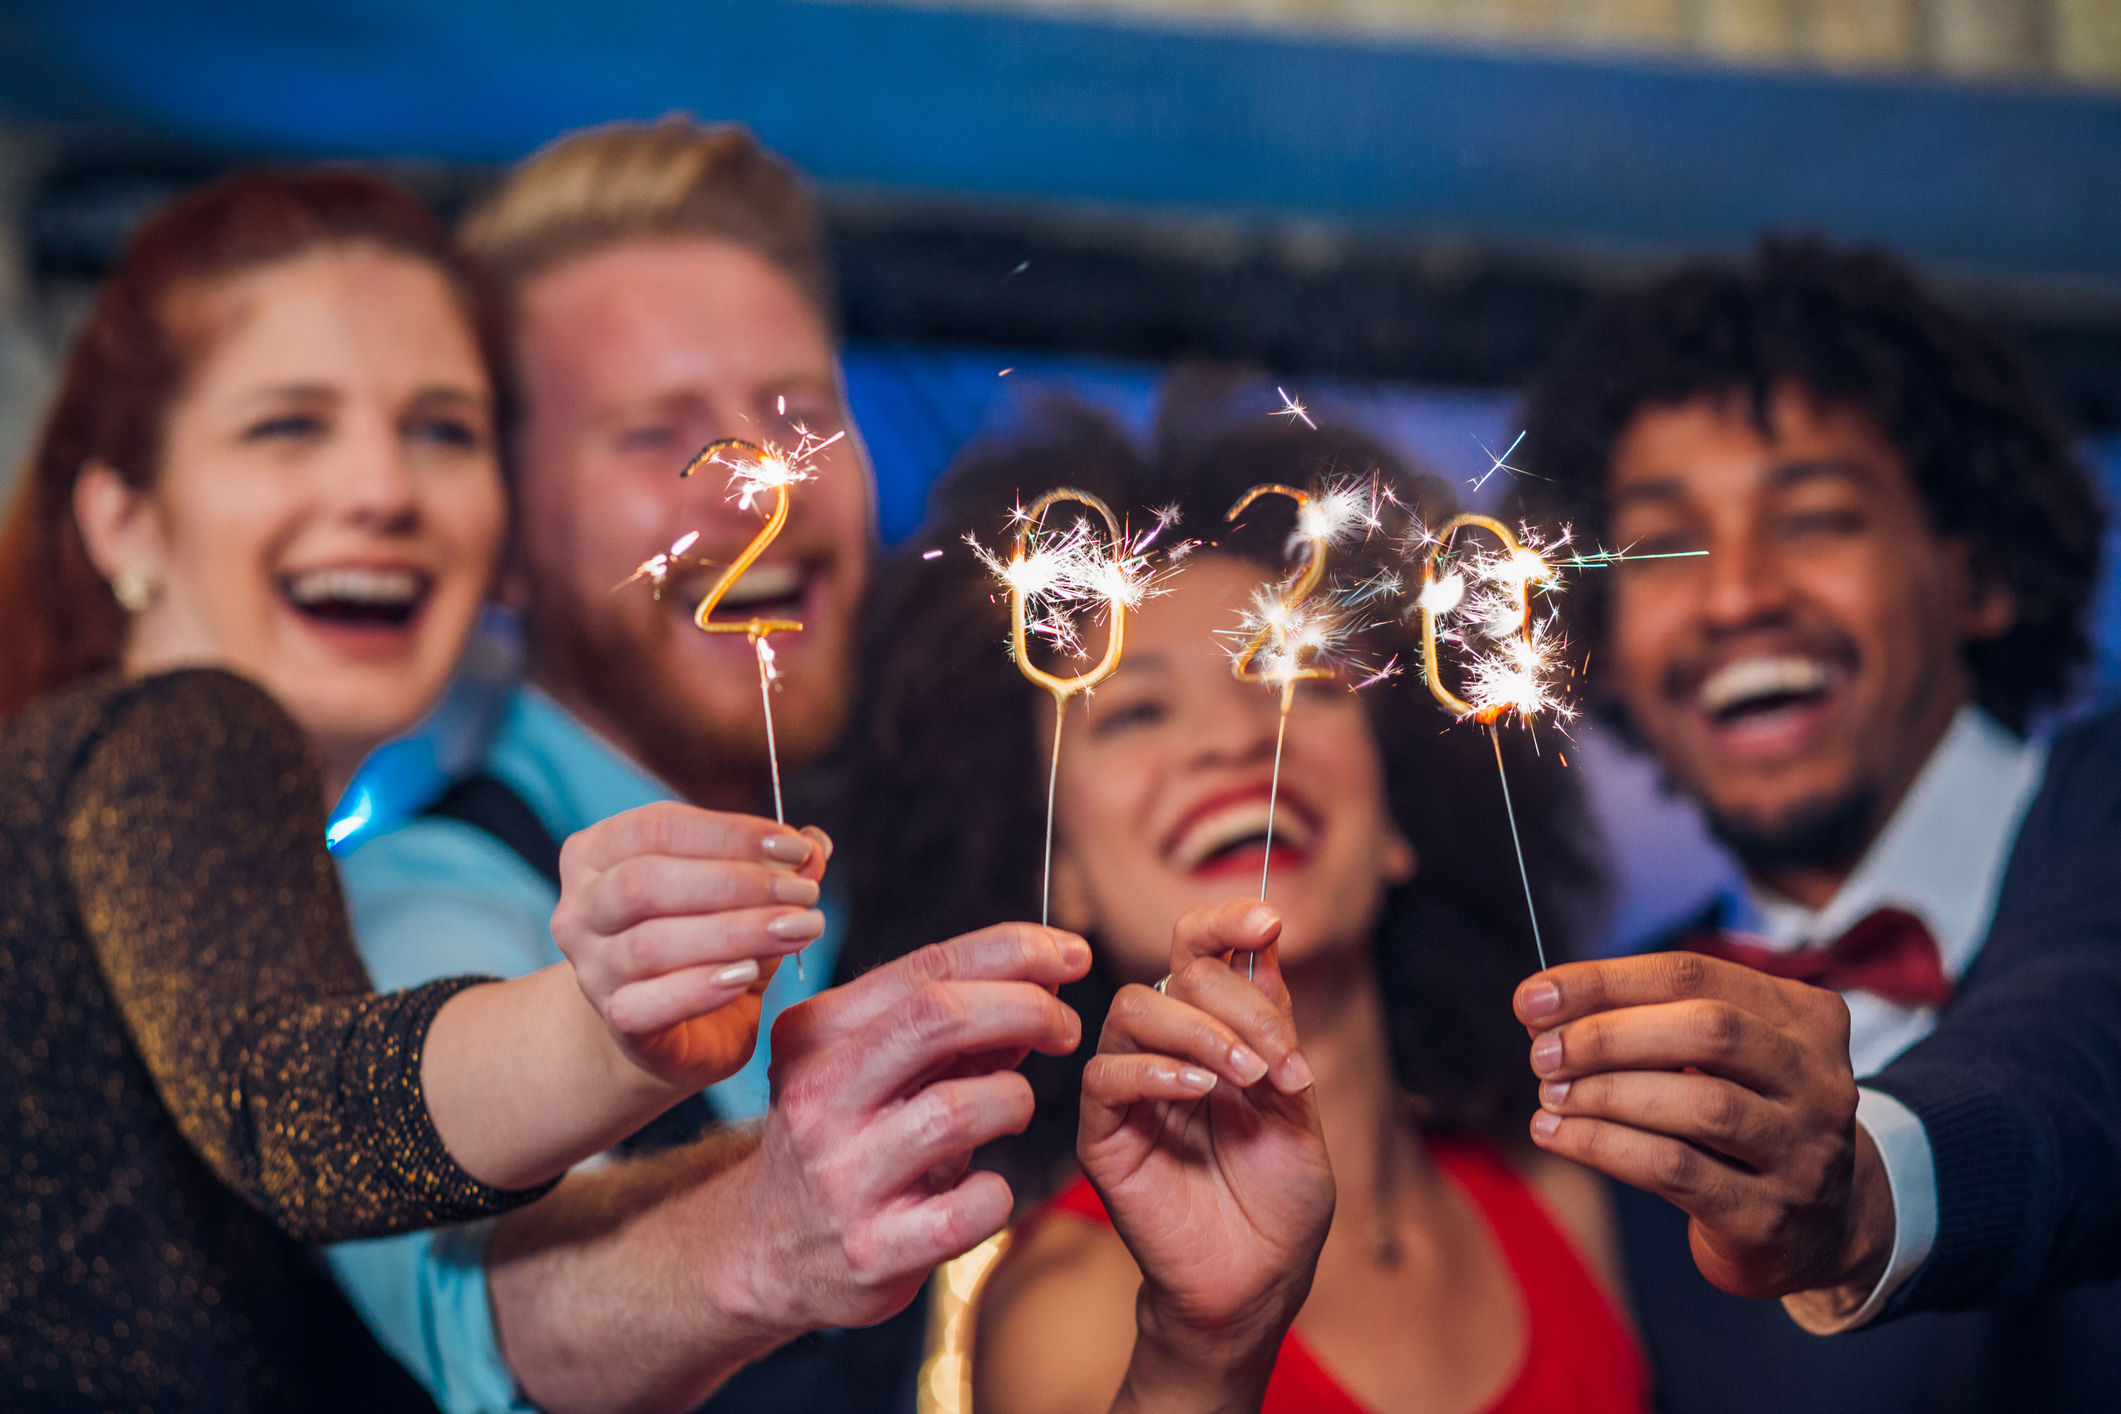 Several friends laugh while holding sparklers in front of them in the shape of numbers 2020.